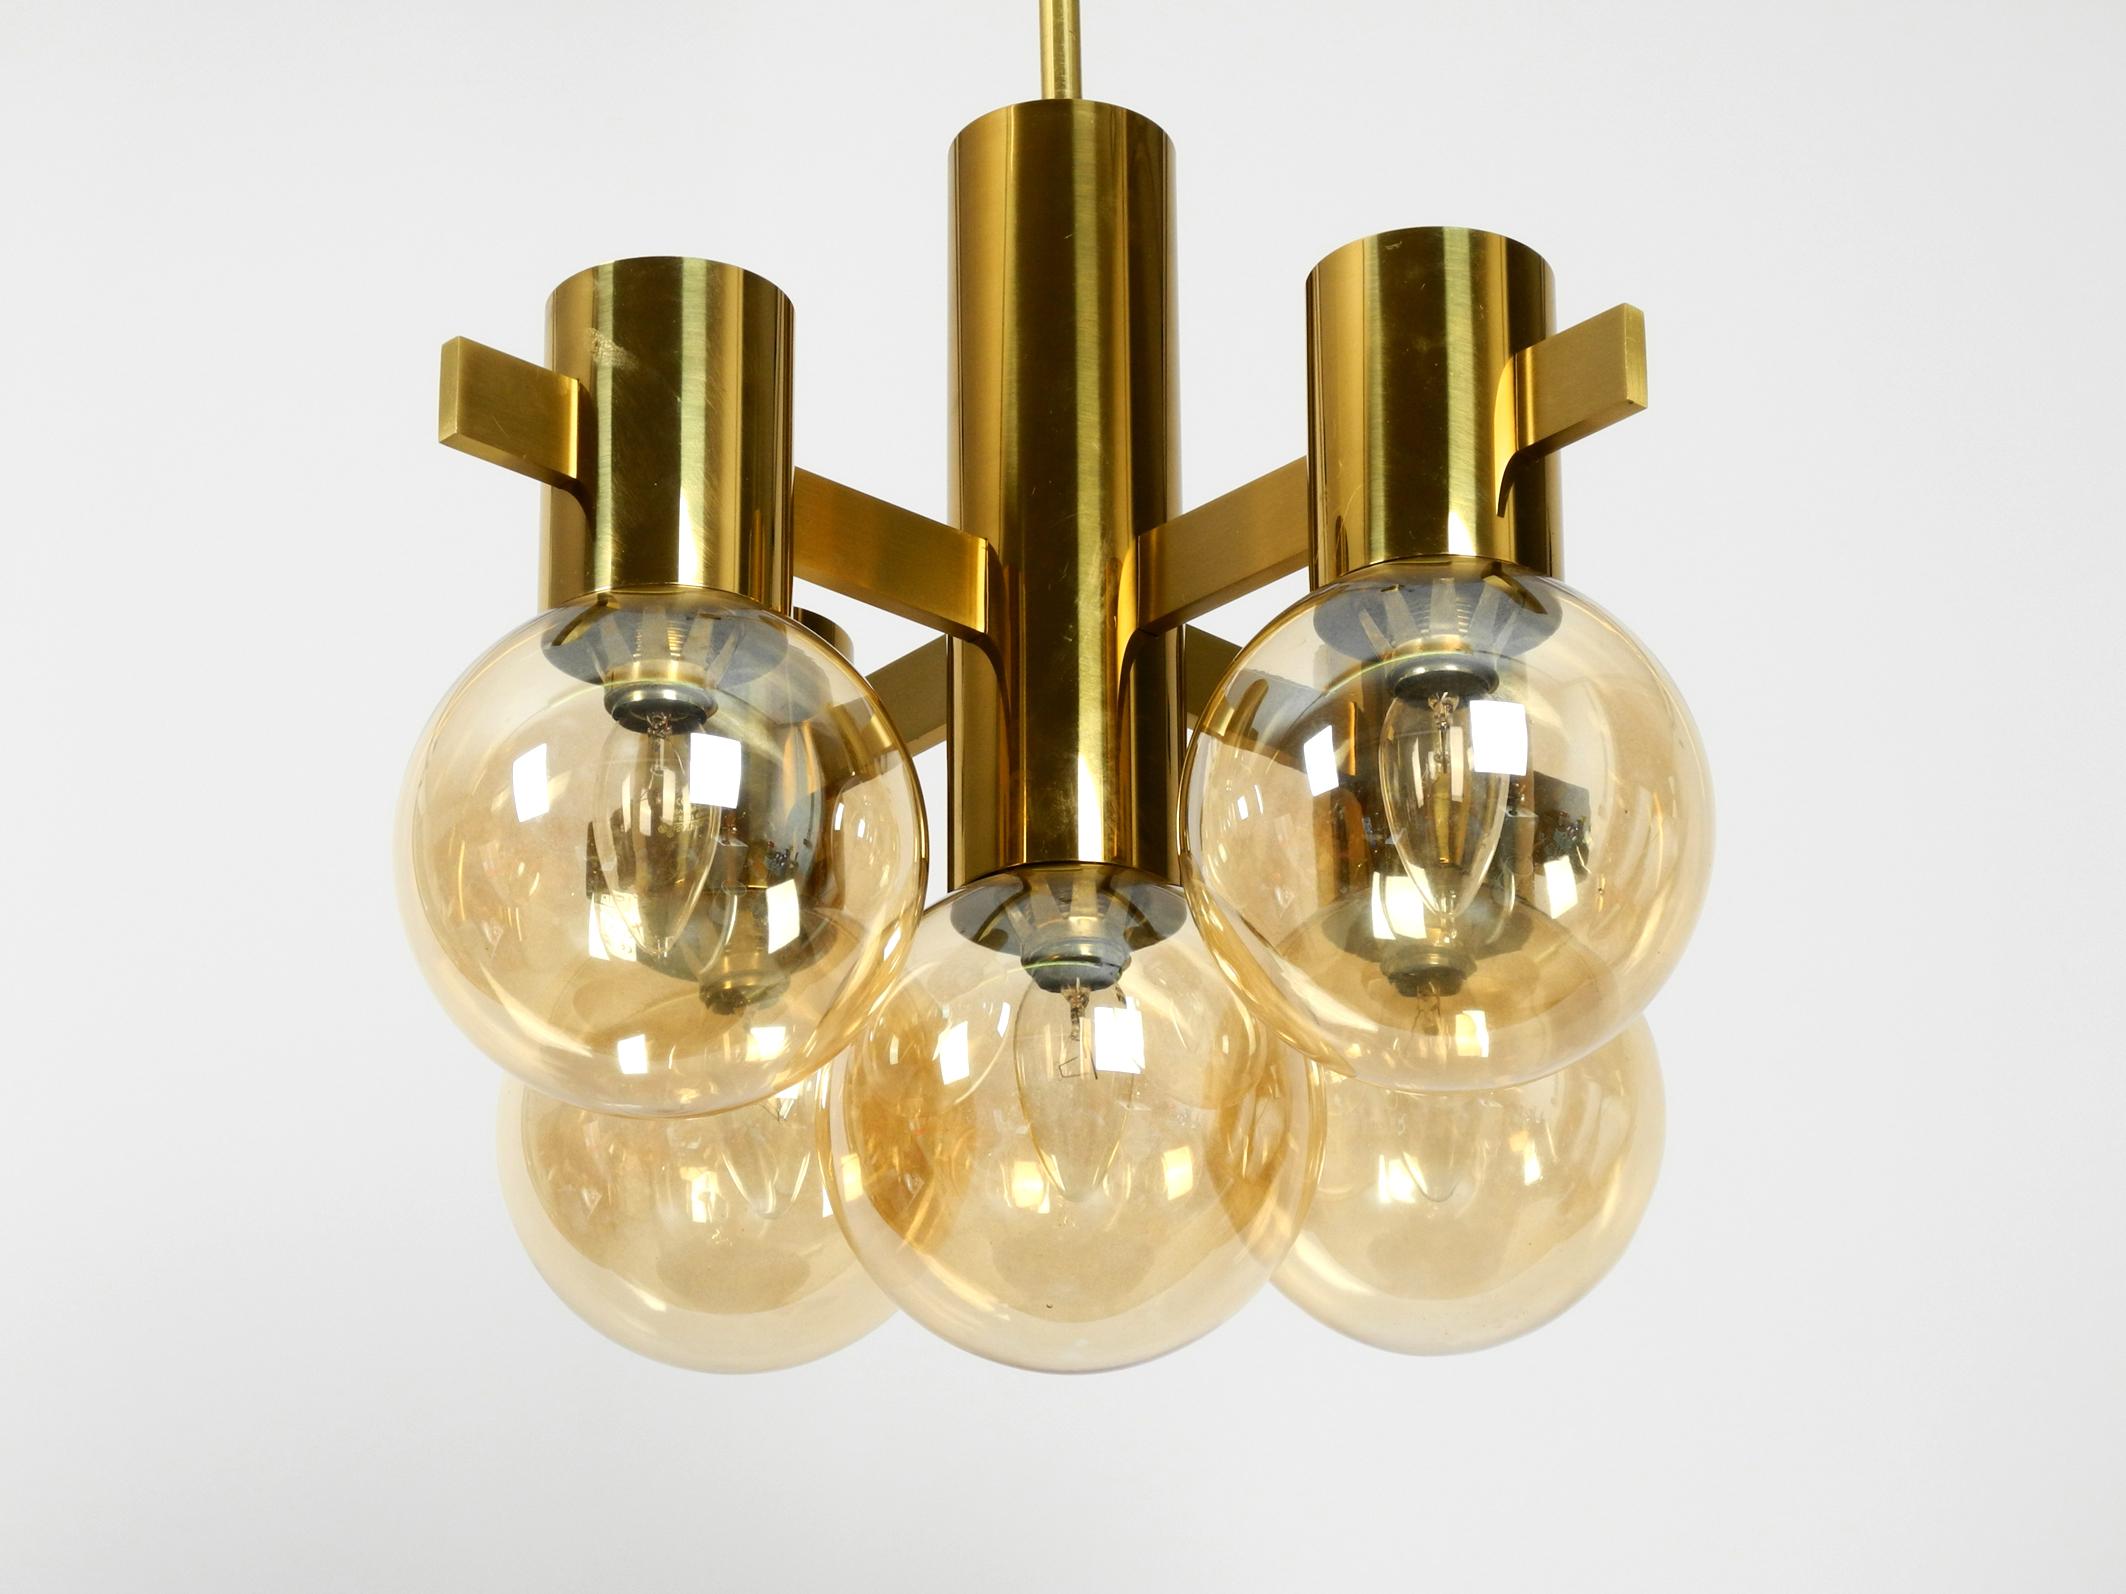 Beautiful rare brass ceiling lamp from the 1960s with 5 glass balls by 
Hans Agne Jakobsson. Made in Sweden. 
Large glass balls tinted golden. 
Entire lamp, canopy and rod are made of polished brass. 
Gorgeous elegant design. Very high quality.